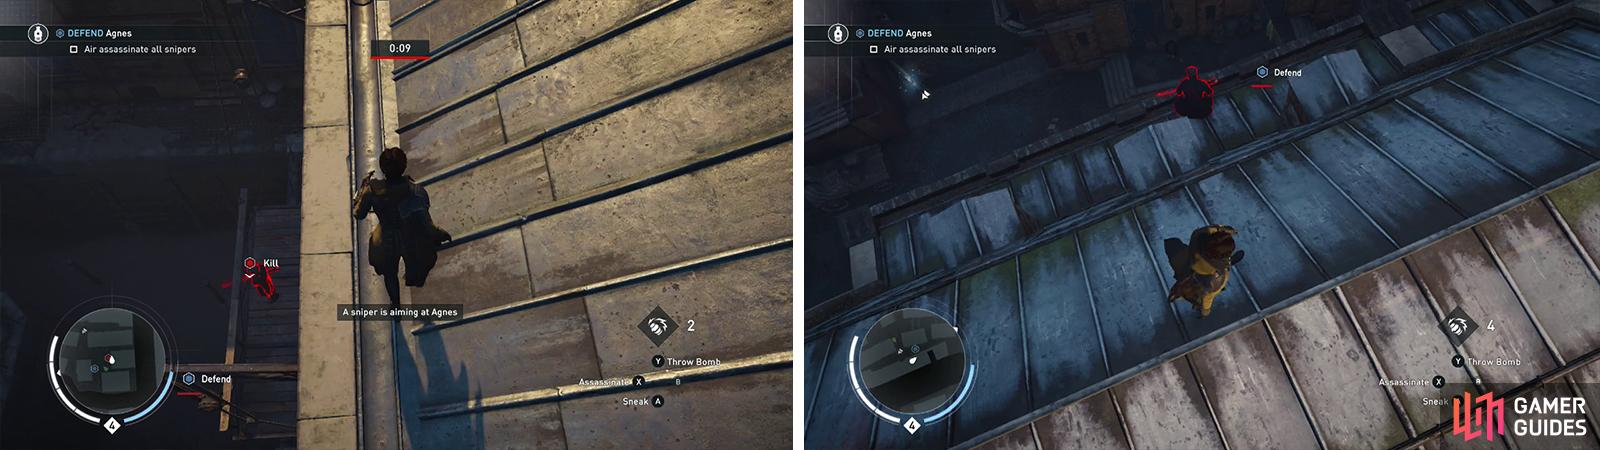 You’ll need to climb up and air assassinate each of the Snipers for the optional objective. Sniper 1 (left) and Sniper 4 (right) pictured.